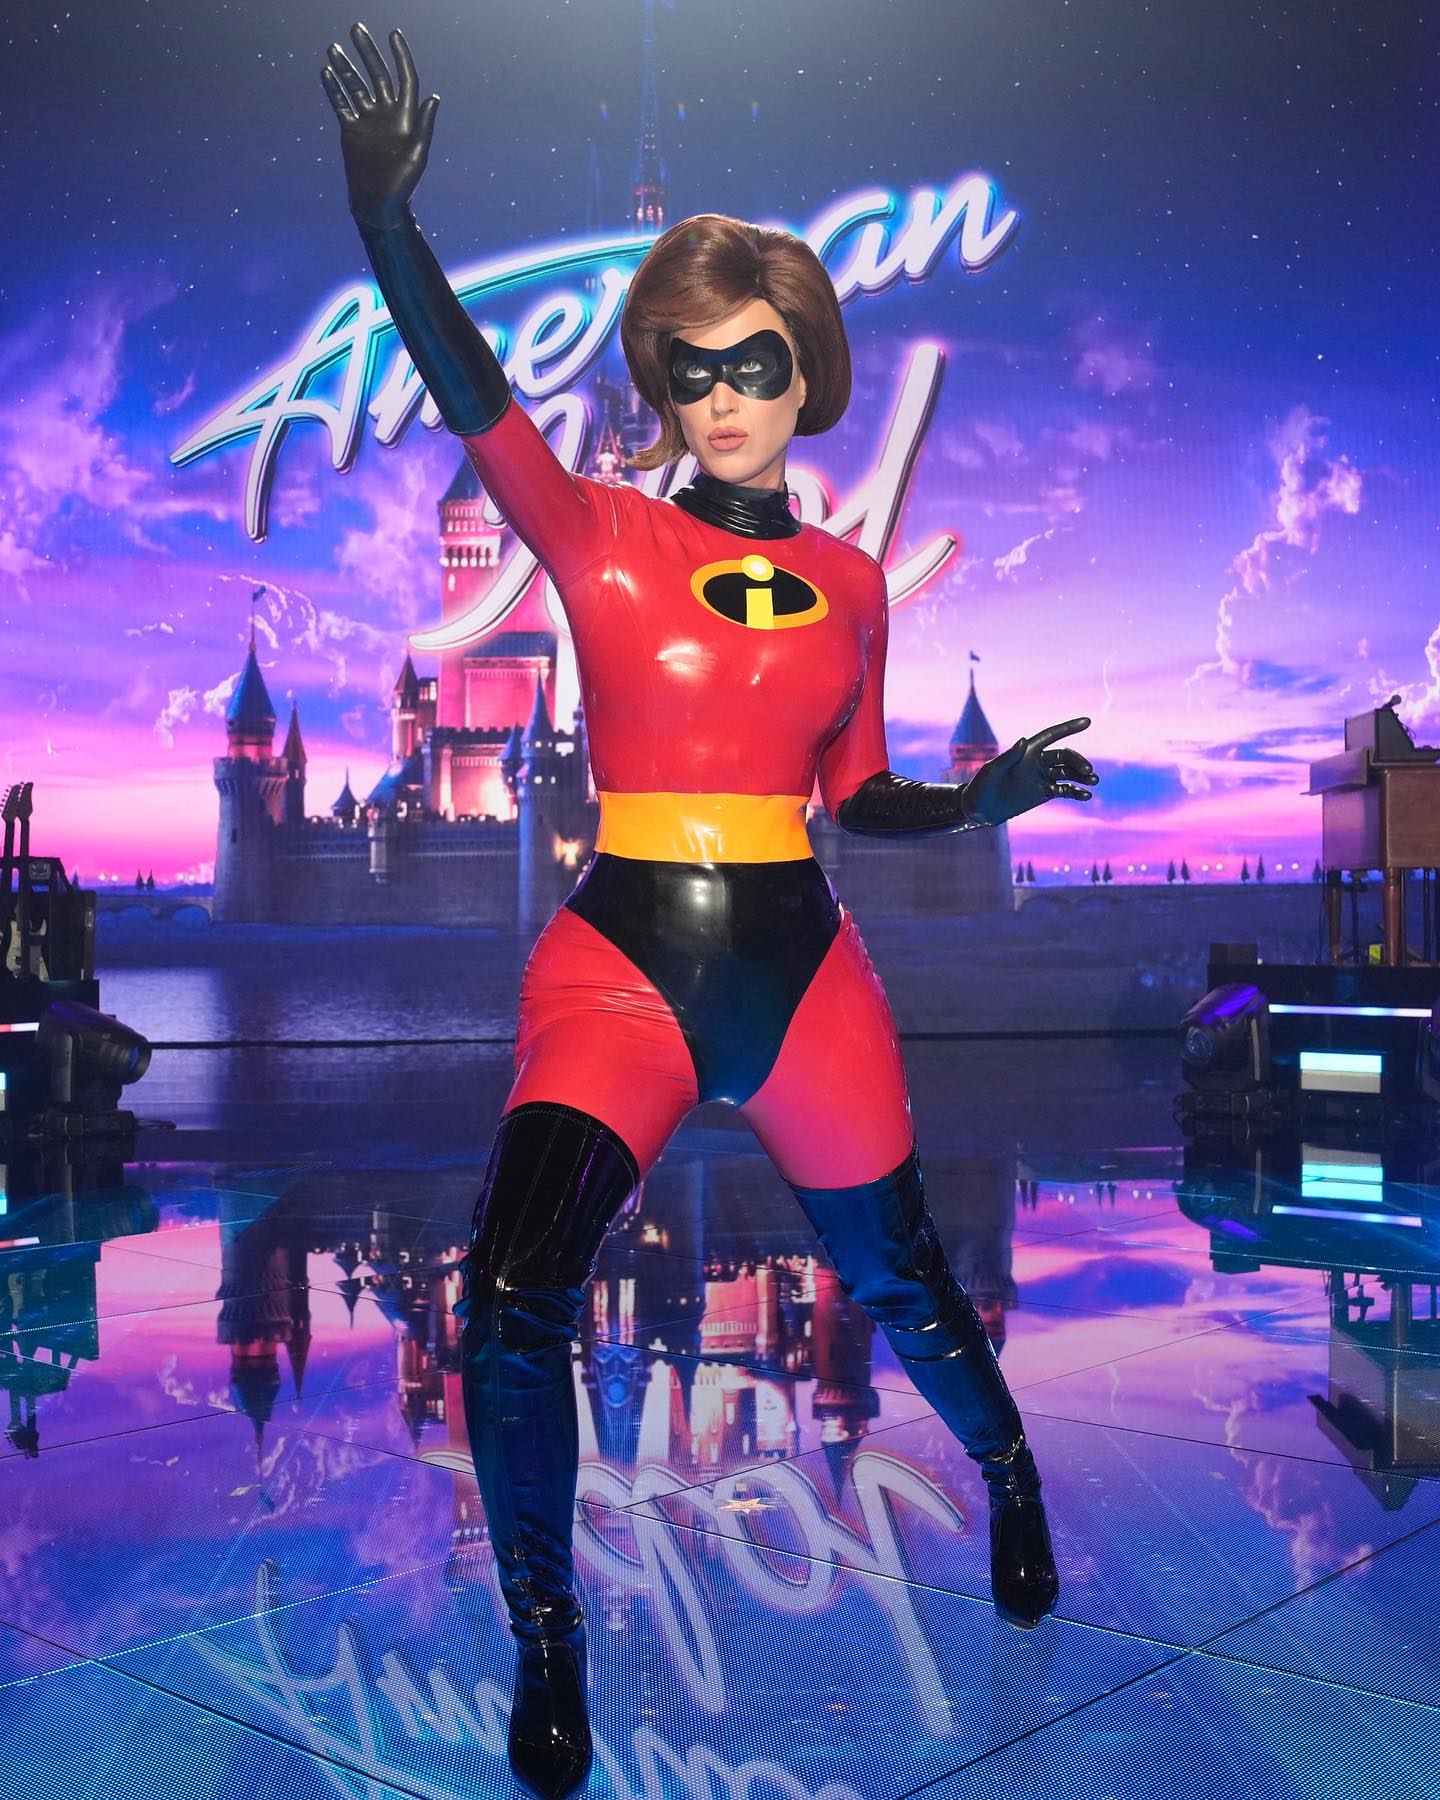 Photos n°4 : Katy Perry in Incredibles Cosplay for the Nerds!